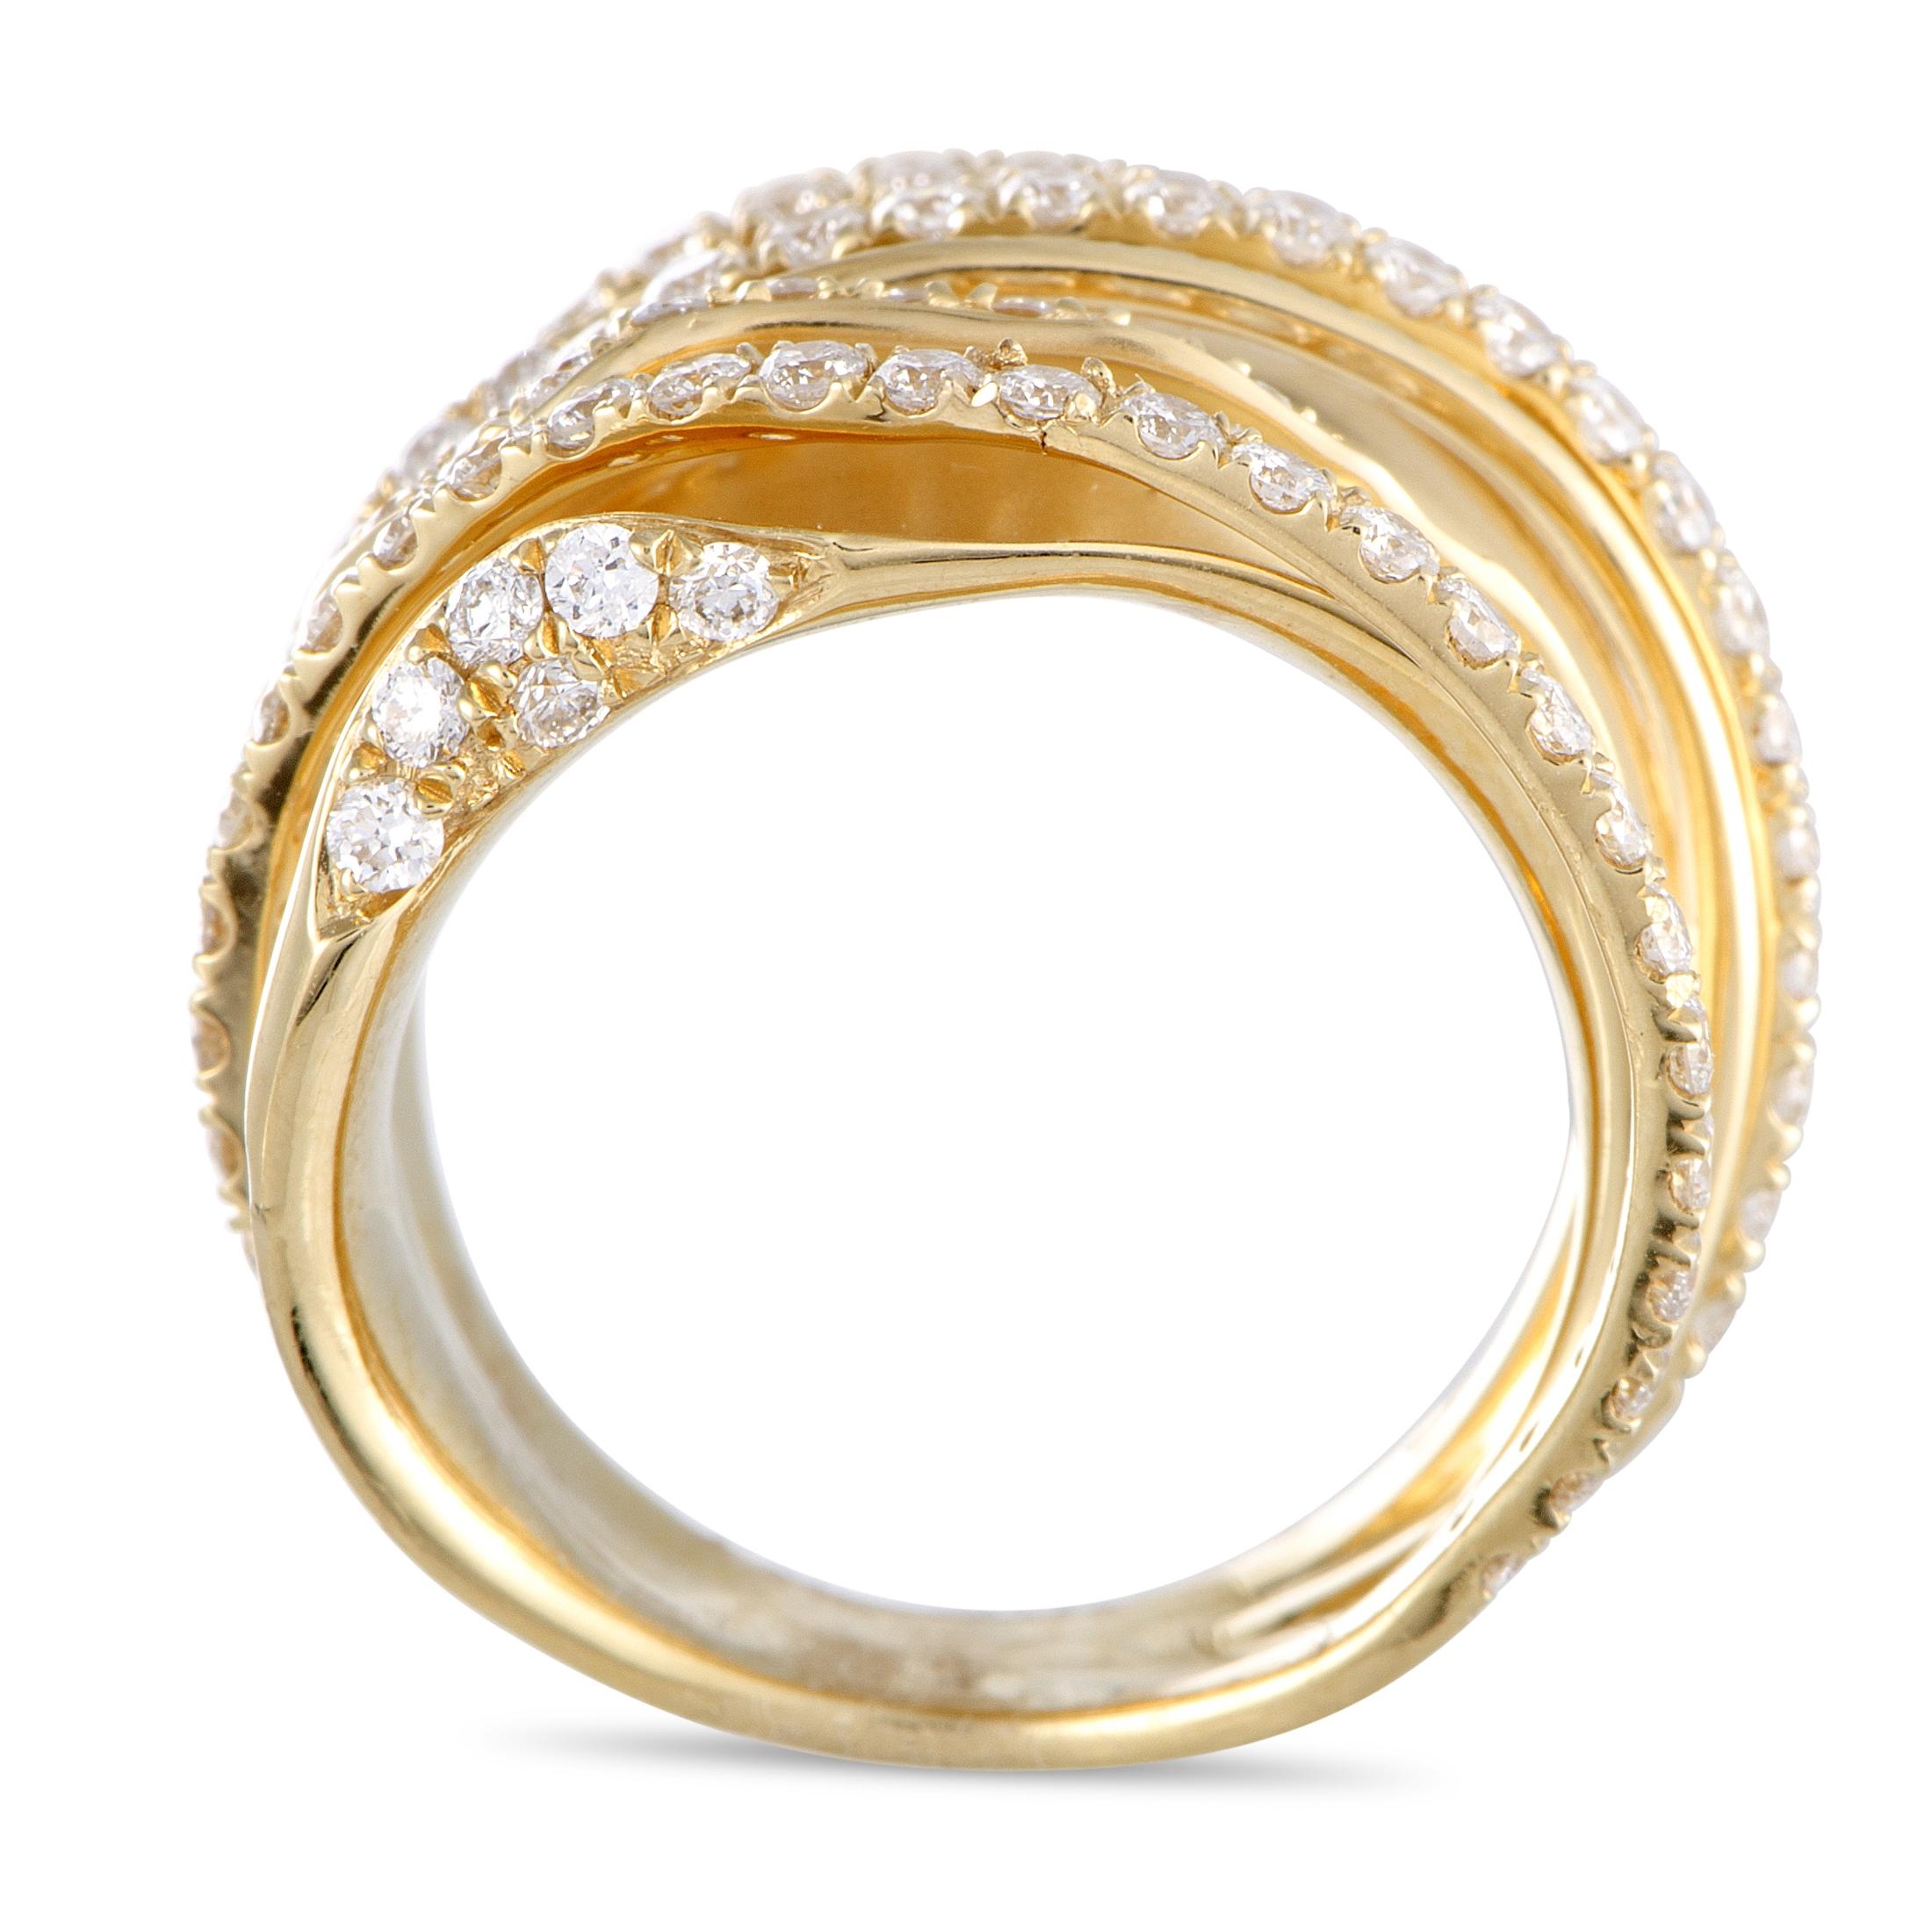 This LB Exclusive ring is crafted from 18K yellow gold and weighs 9.2 grams, boasting band thickness of 5 mm and top height of 4 mm, while top dimensions measure 17 by 22 mm. The ring is set with diamonds that amount to 1.52 carats.

Offered in